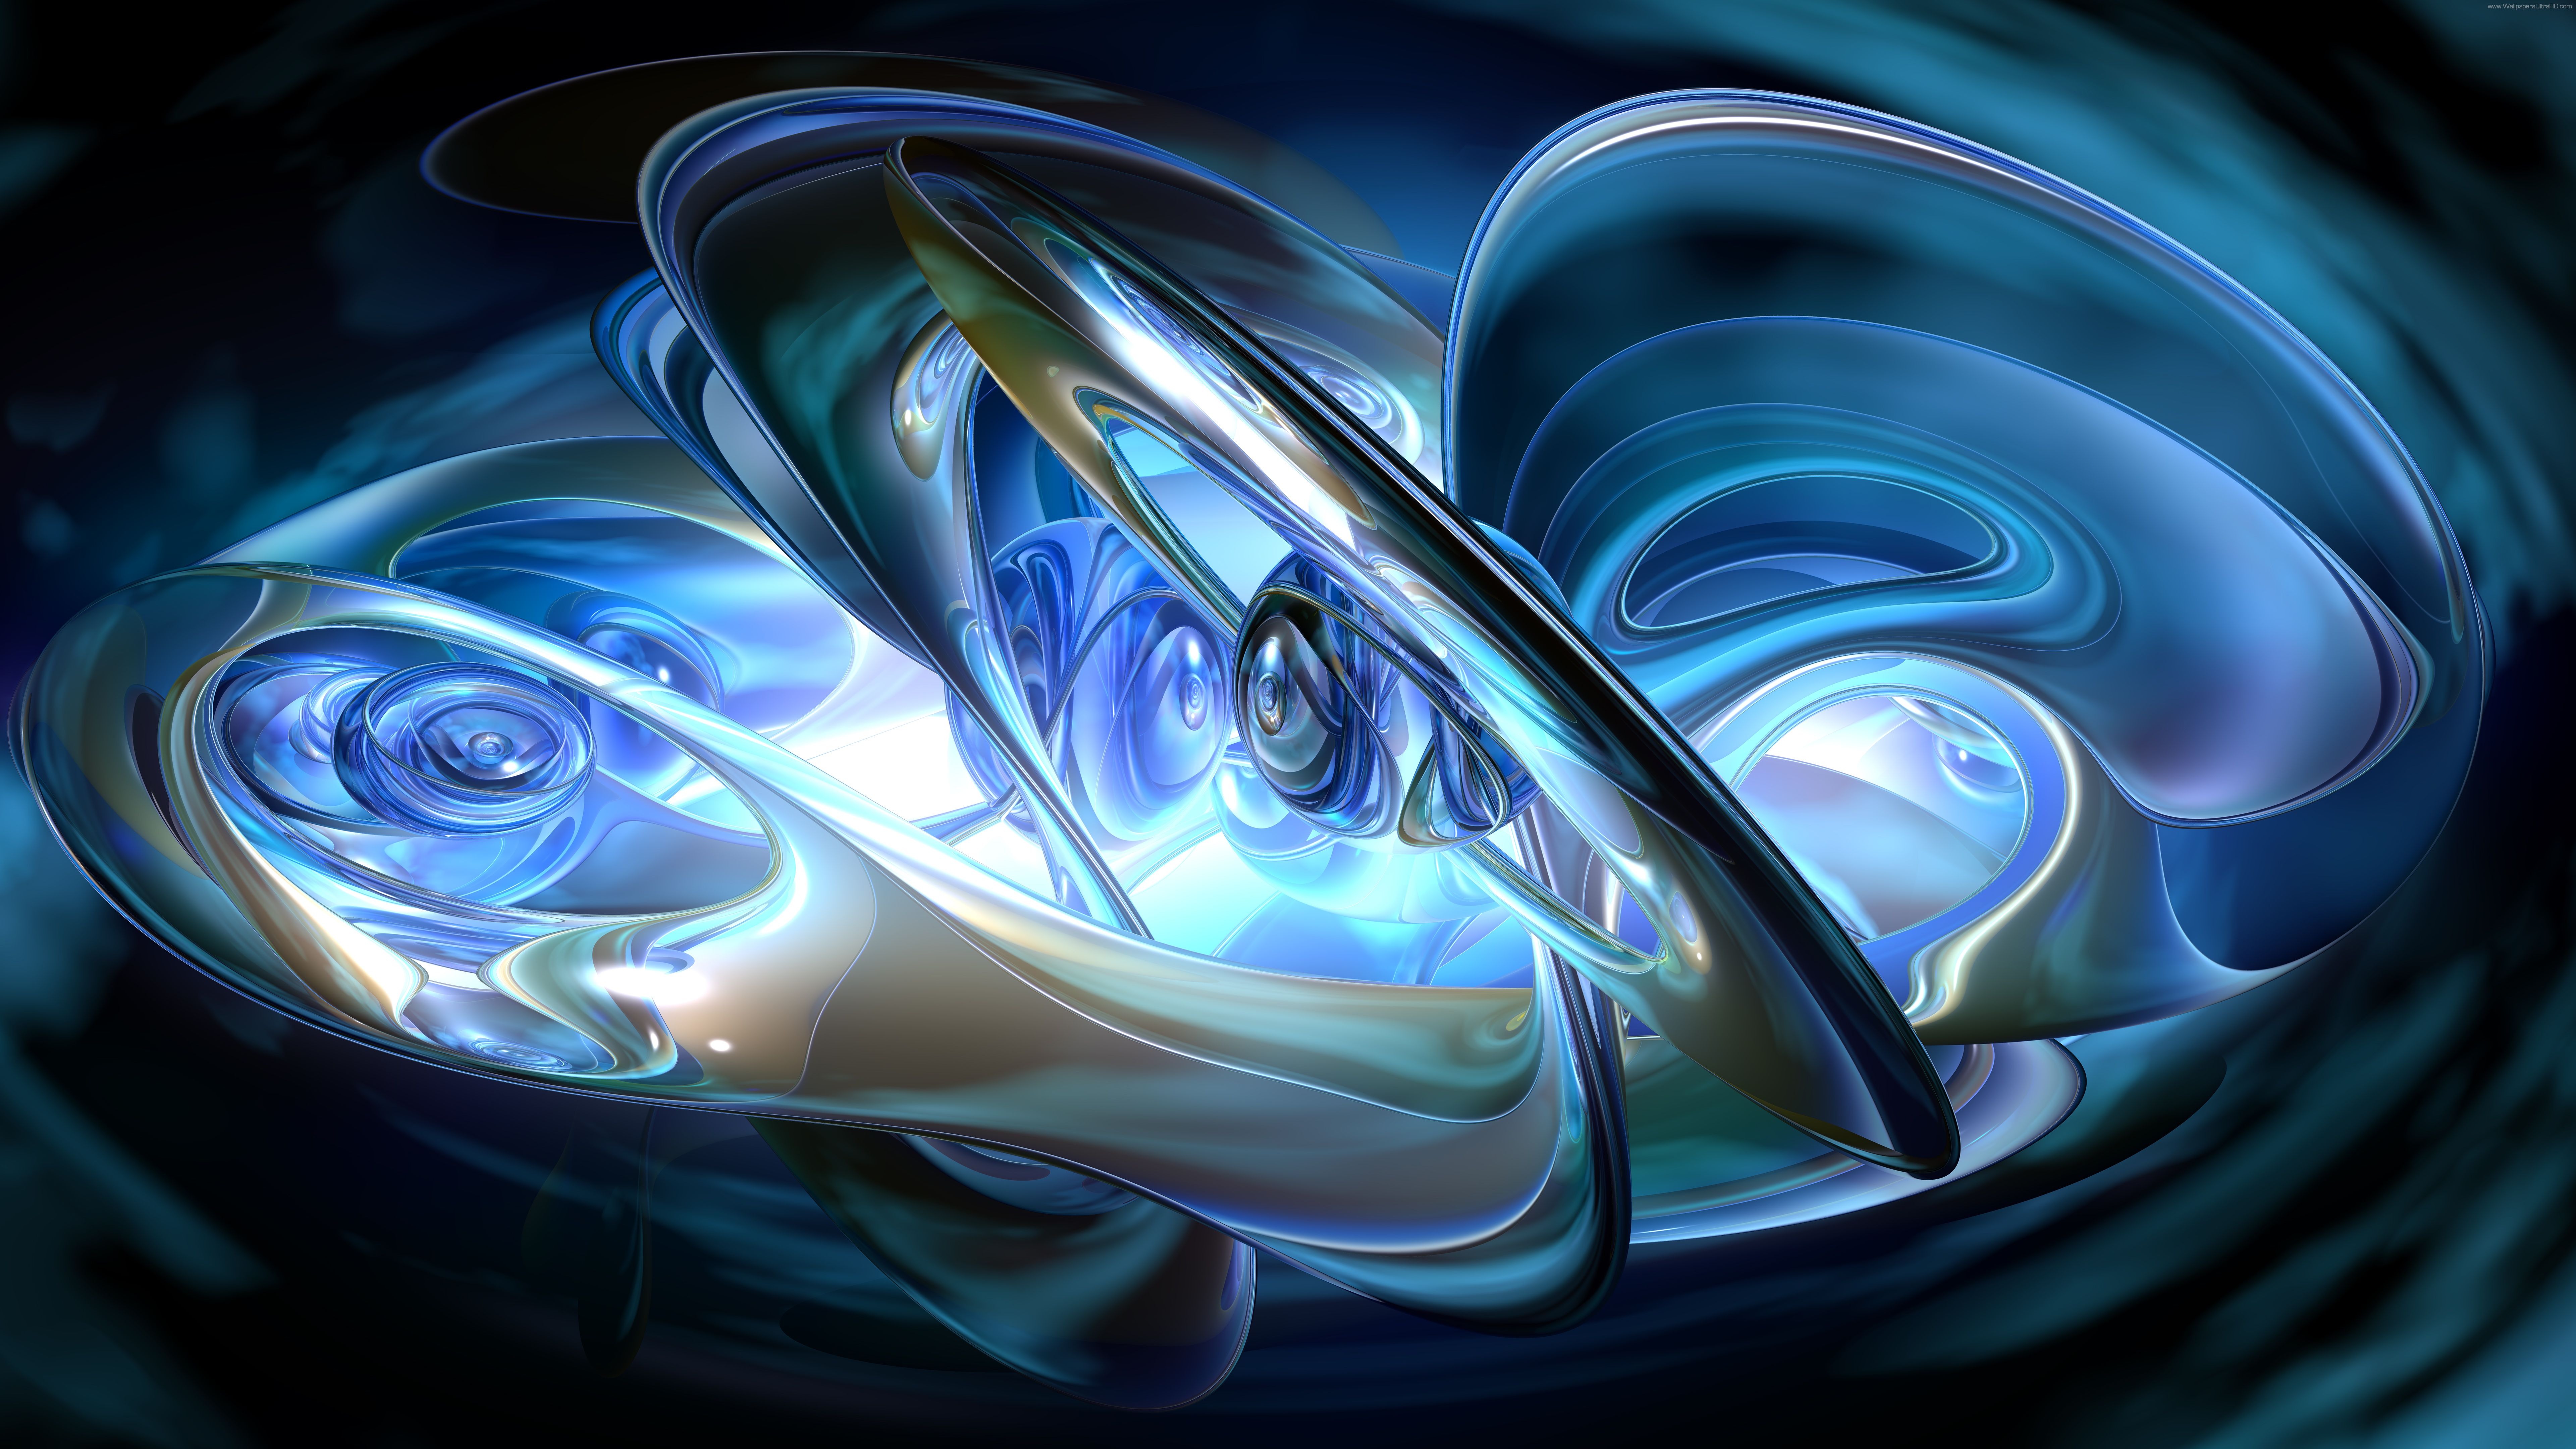 Free download Ultra HD wallpaper 8K 3D blue rings UHD 7680x4320 [7680x4320] for your Desktop, Mobile & Tablet. Explore HD 3D 4K Wallpaper. Ultra HD 3D Wallpaper 1080p, Top